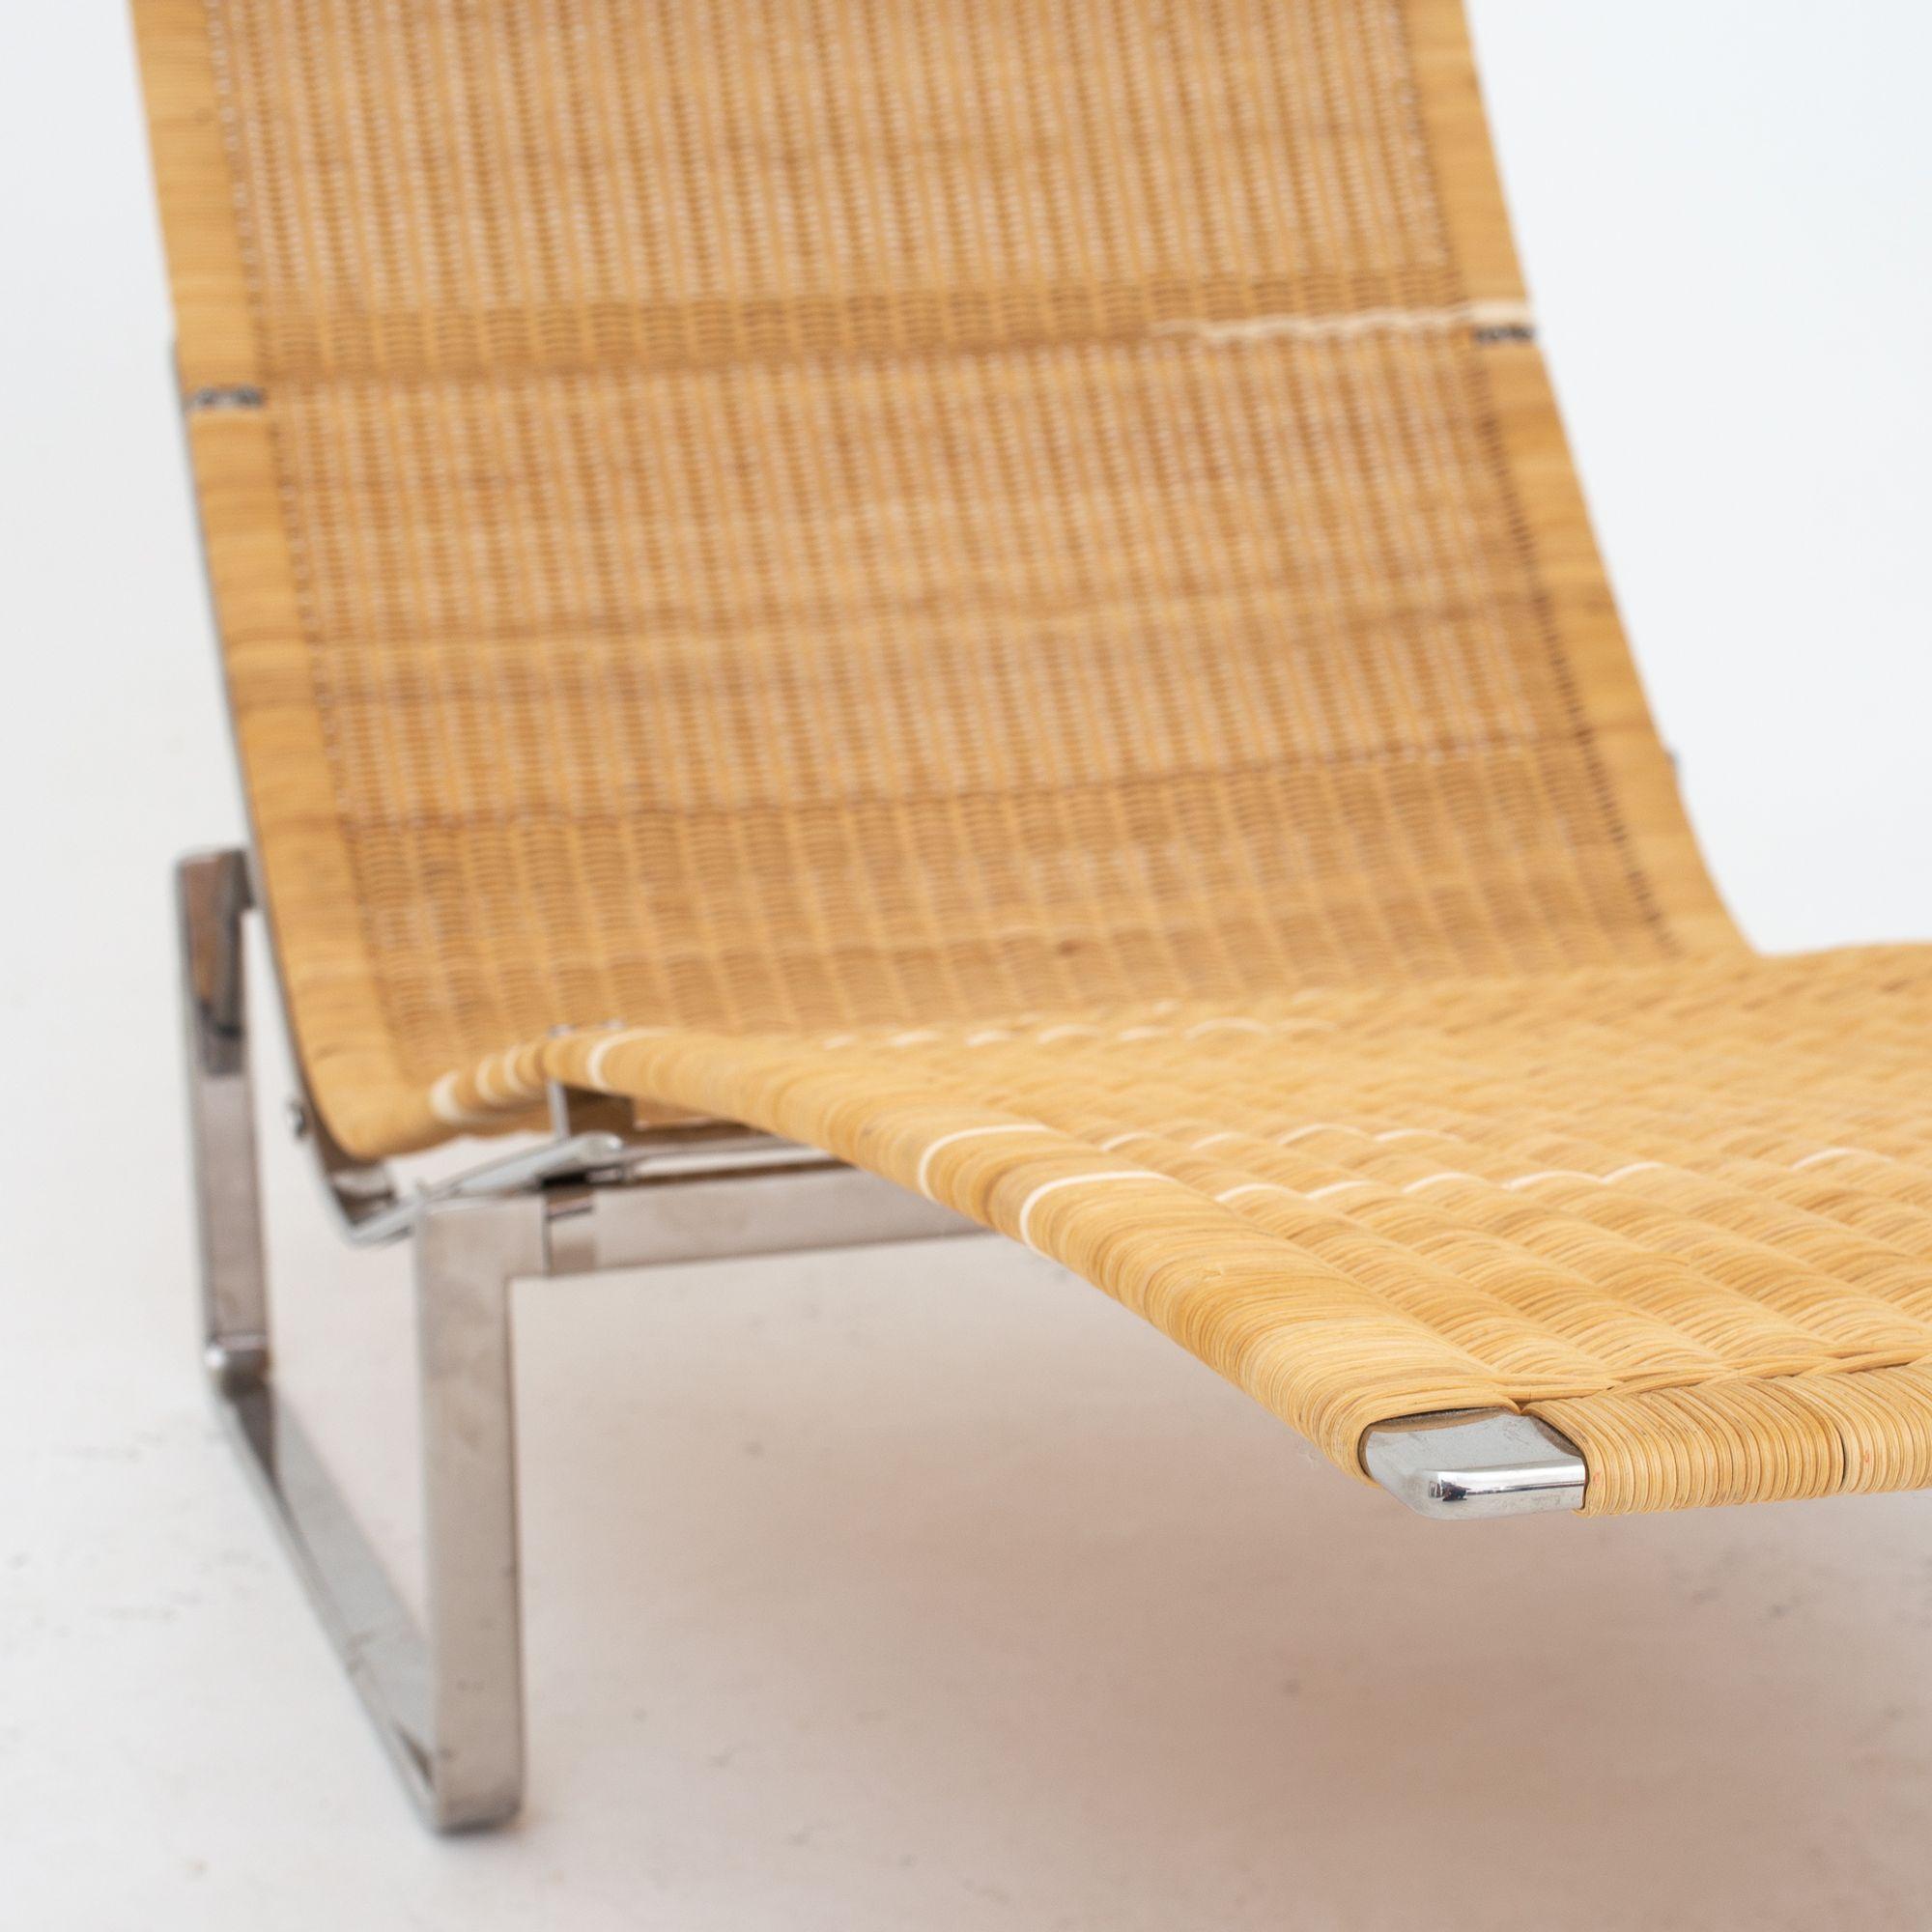 Patinated Chaise Longue by Poul Kjærholm